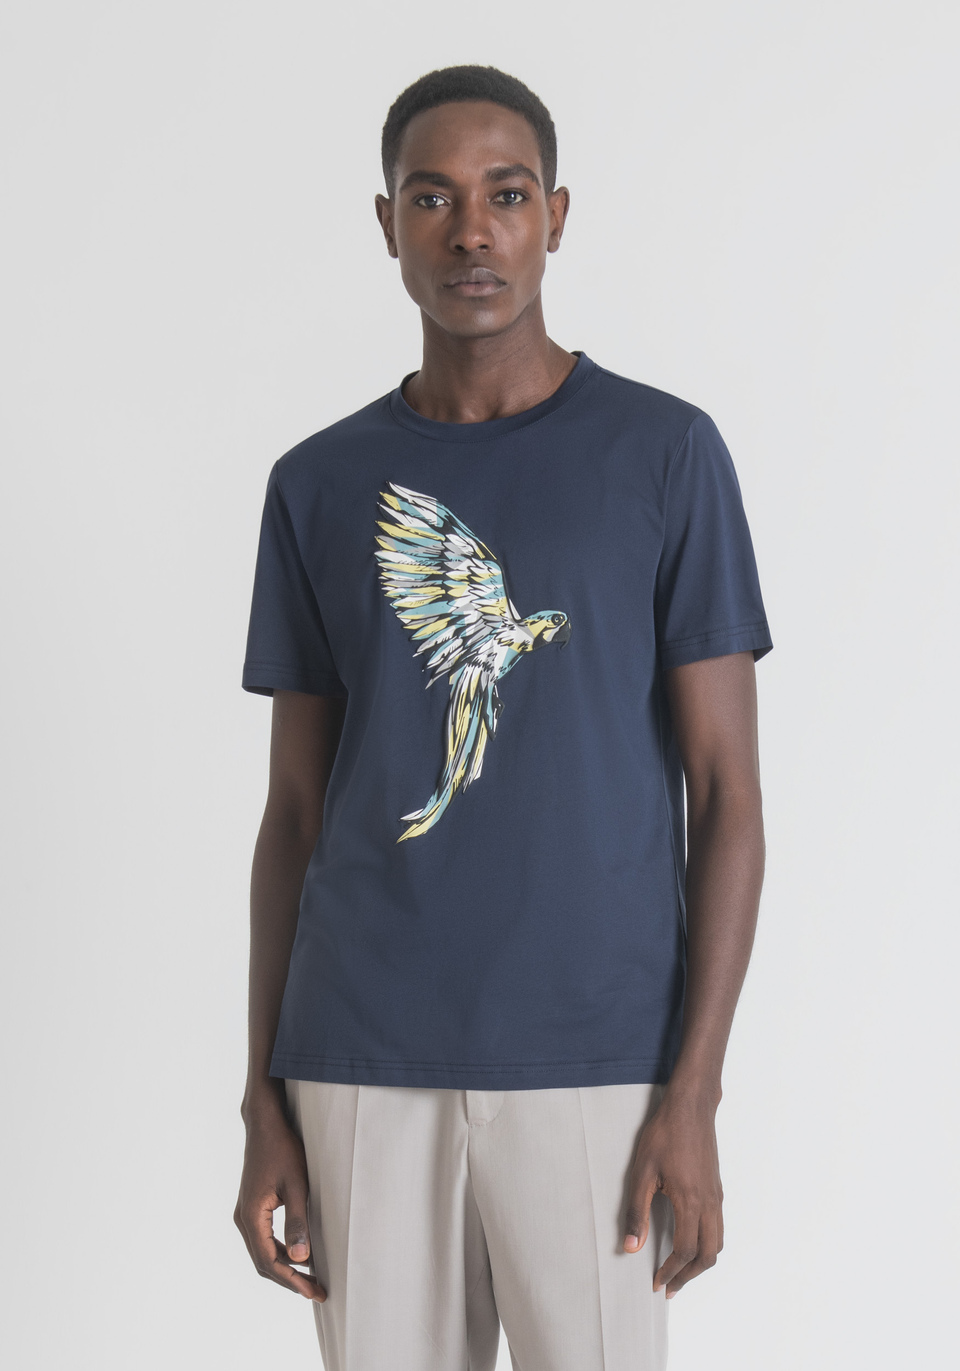 REGULAR-FIT T-SHIRT IN PURE COTTON WITH PARROT PRINT - Antony Morato Online Shop